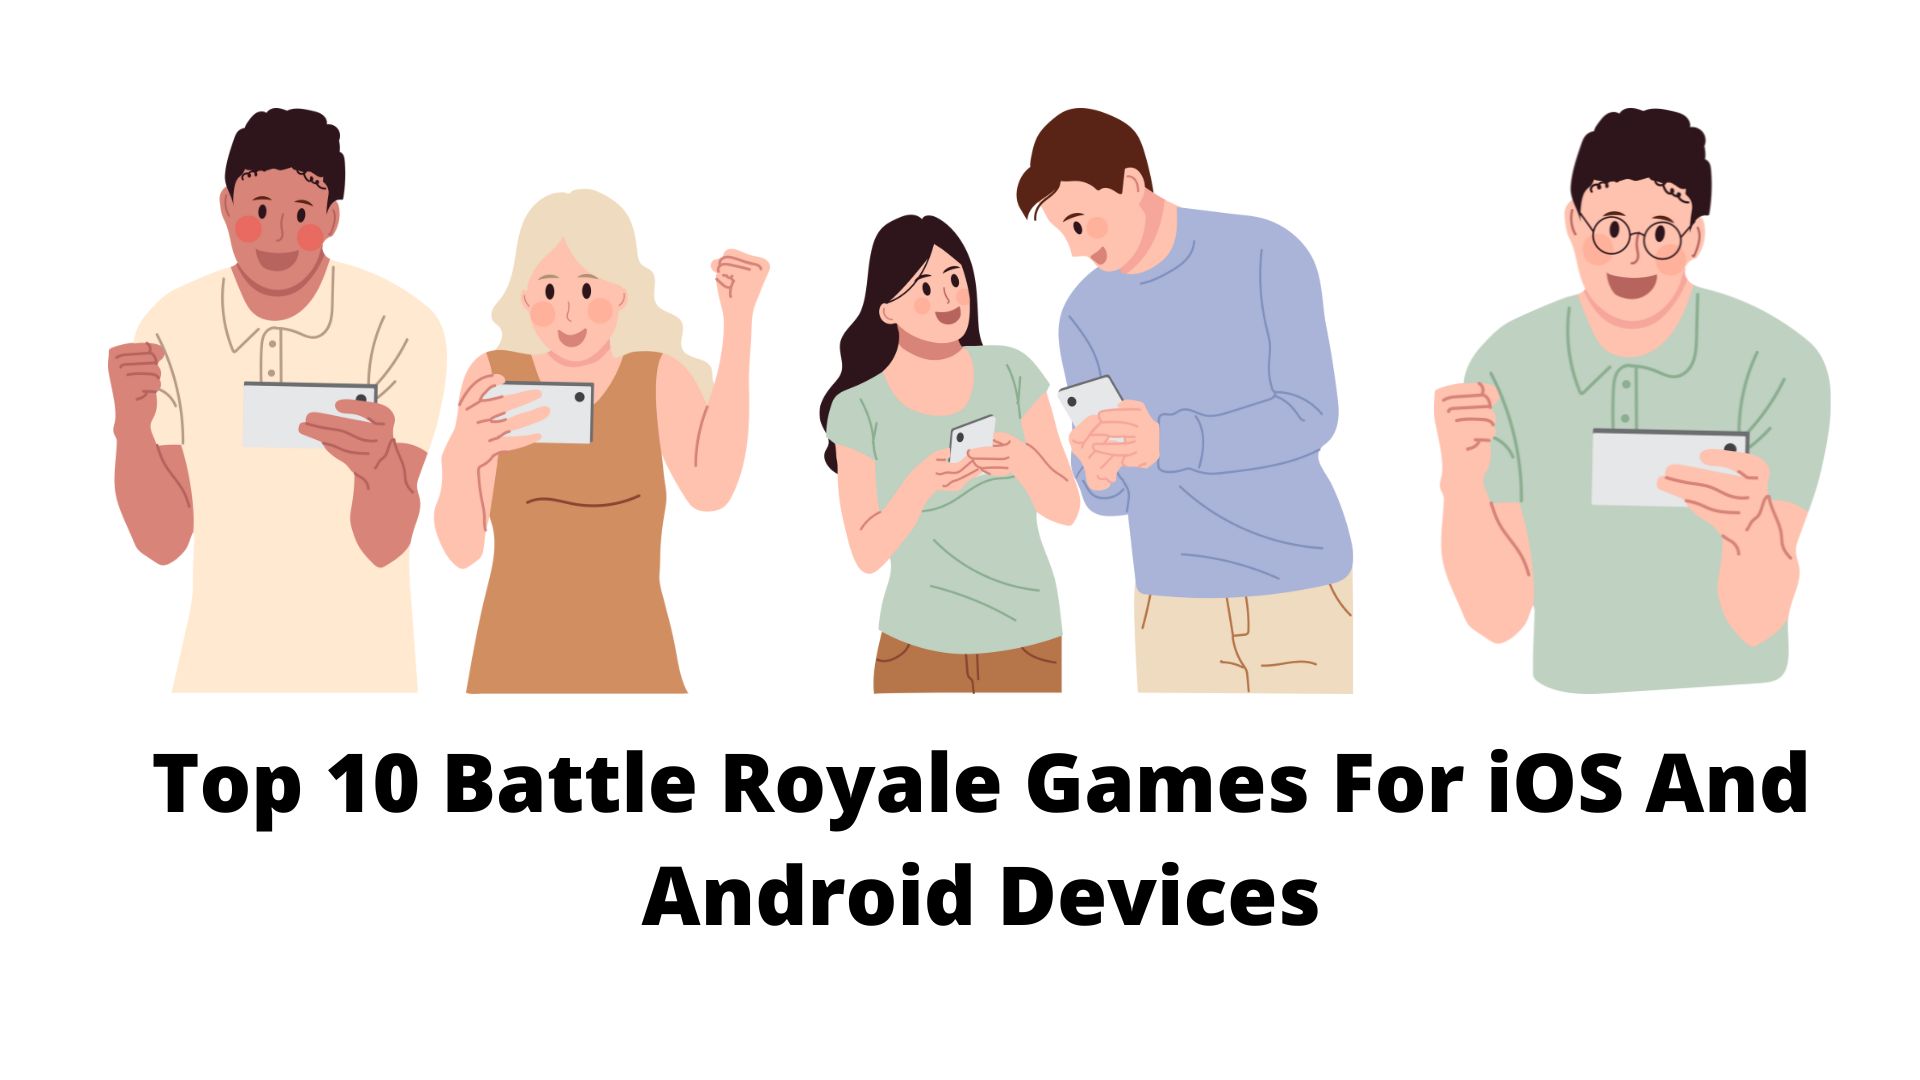 TOP 10 BEST SINGLE PLAYER GAMES FOR ANDROID & IOS